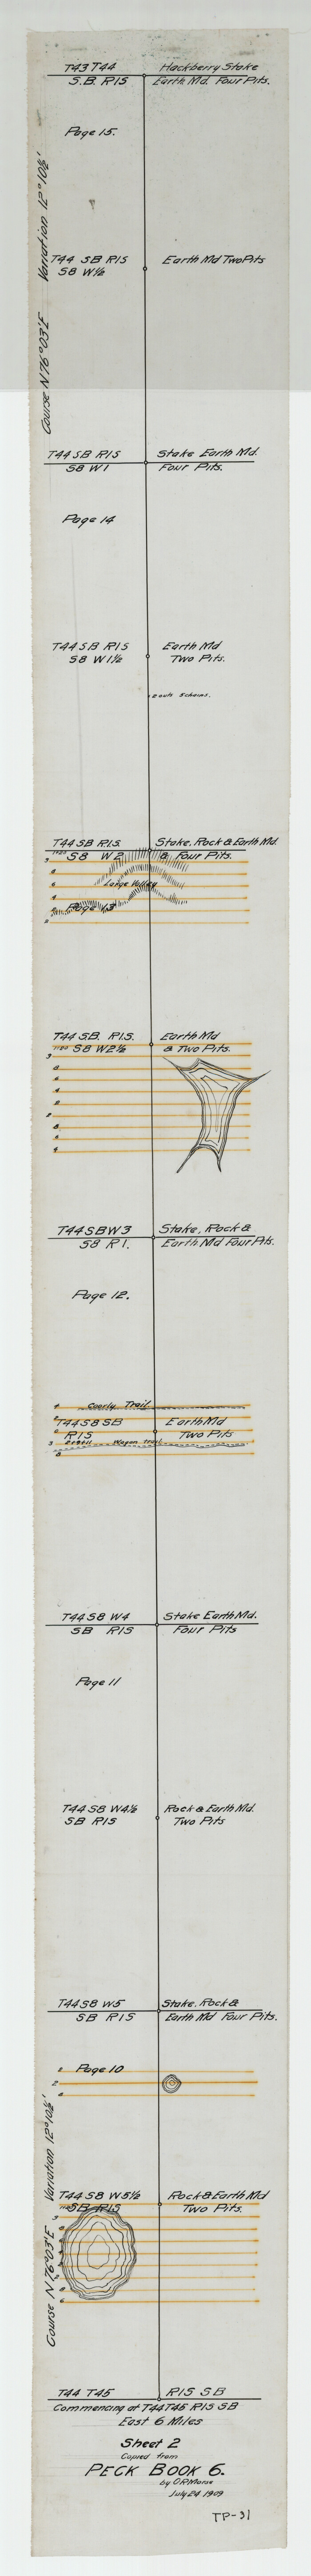 93172, Sheet 2 copied from Peck Book 6 [Strip Map showing T. & P. connecting lines], Twichell Survey Records